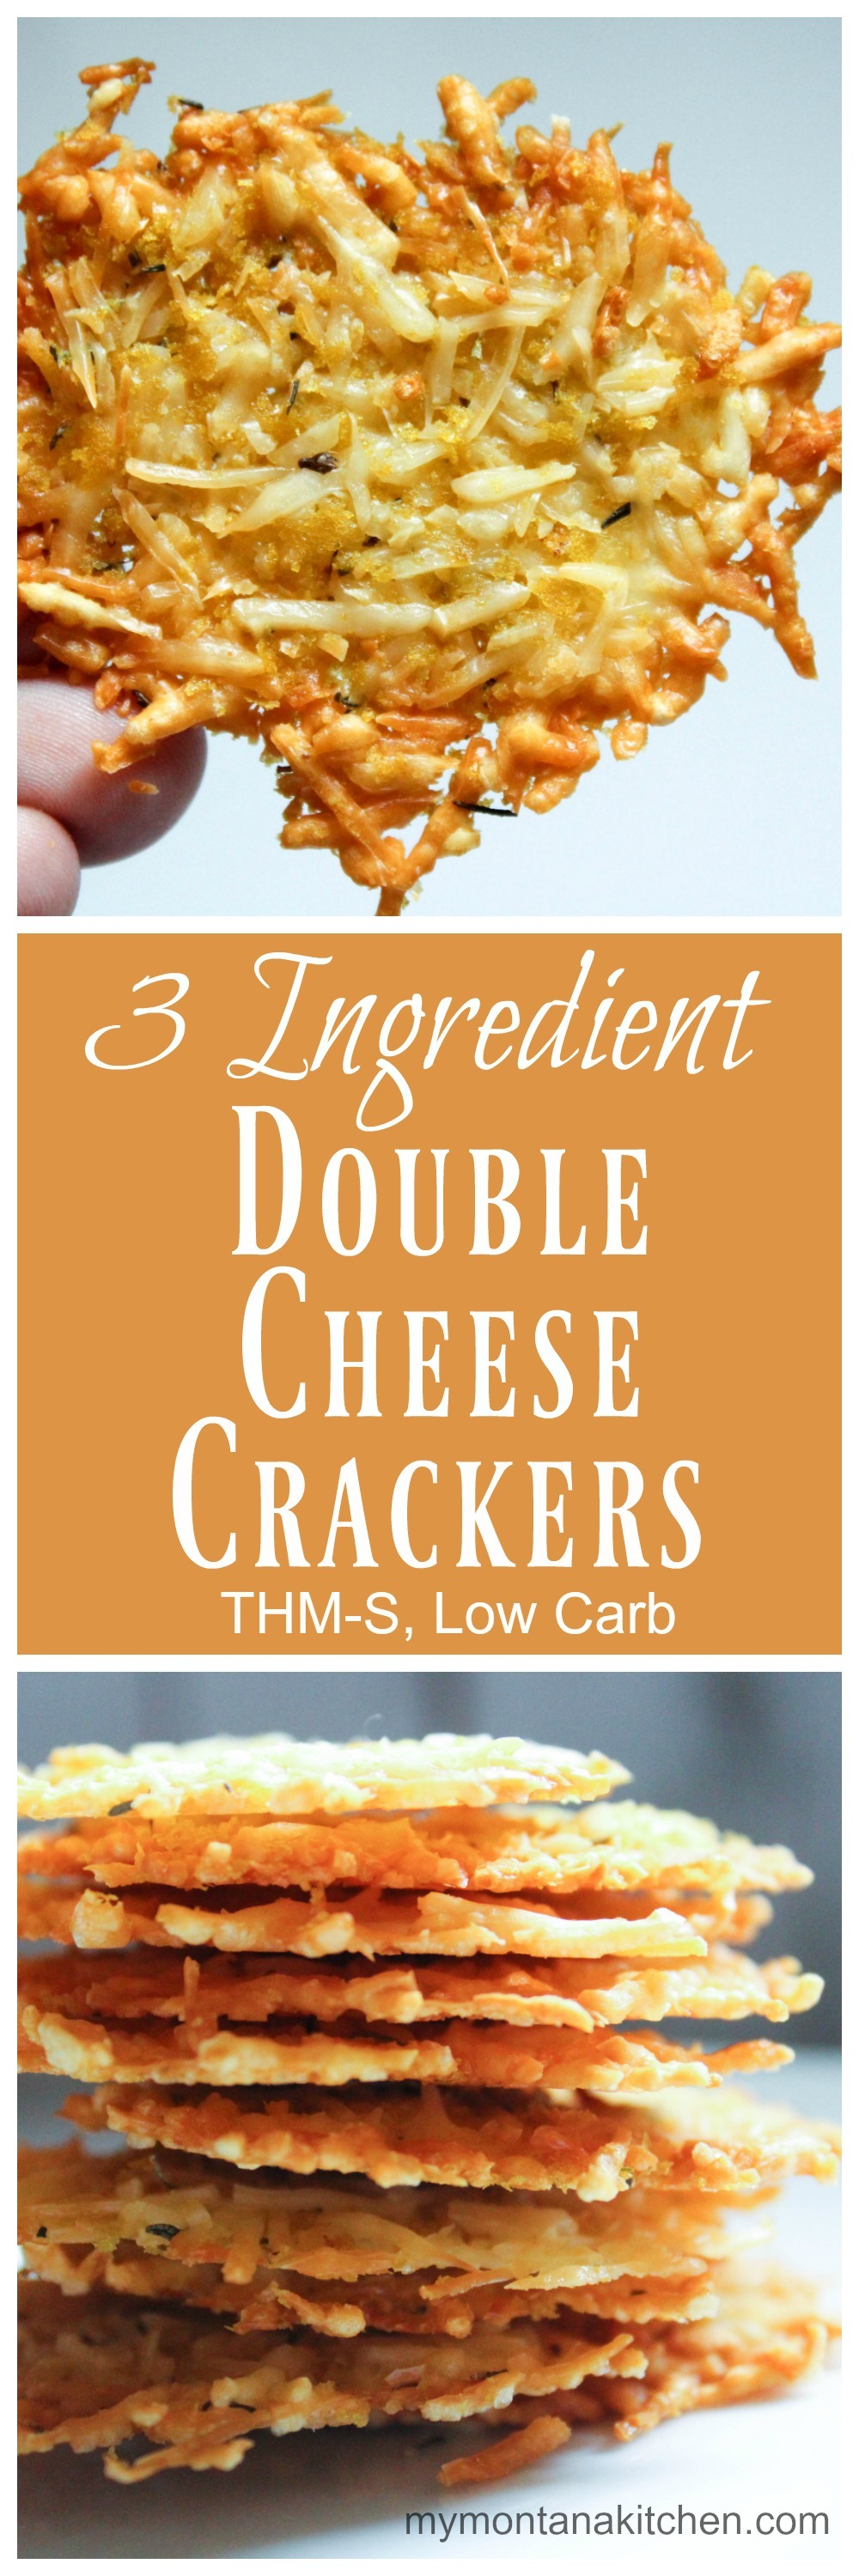 3 Ingredient Double Cheese Crackers (THM-S, Low Carb)